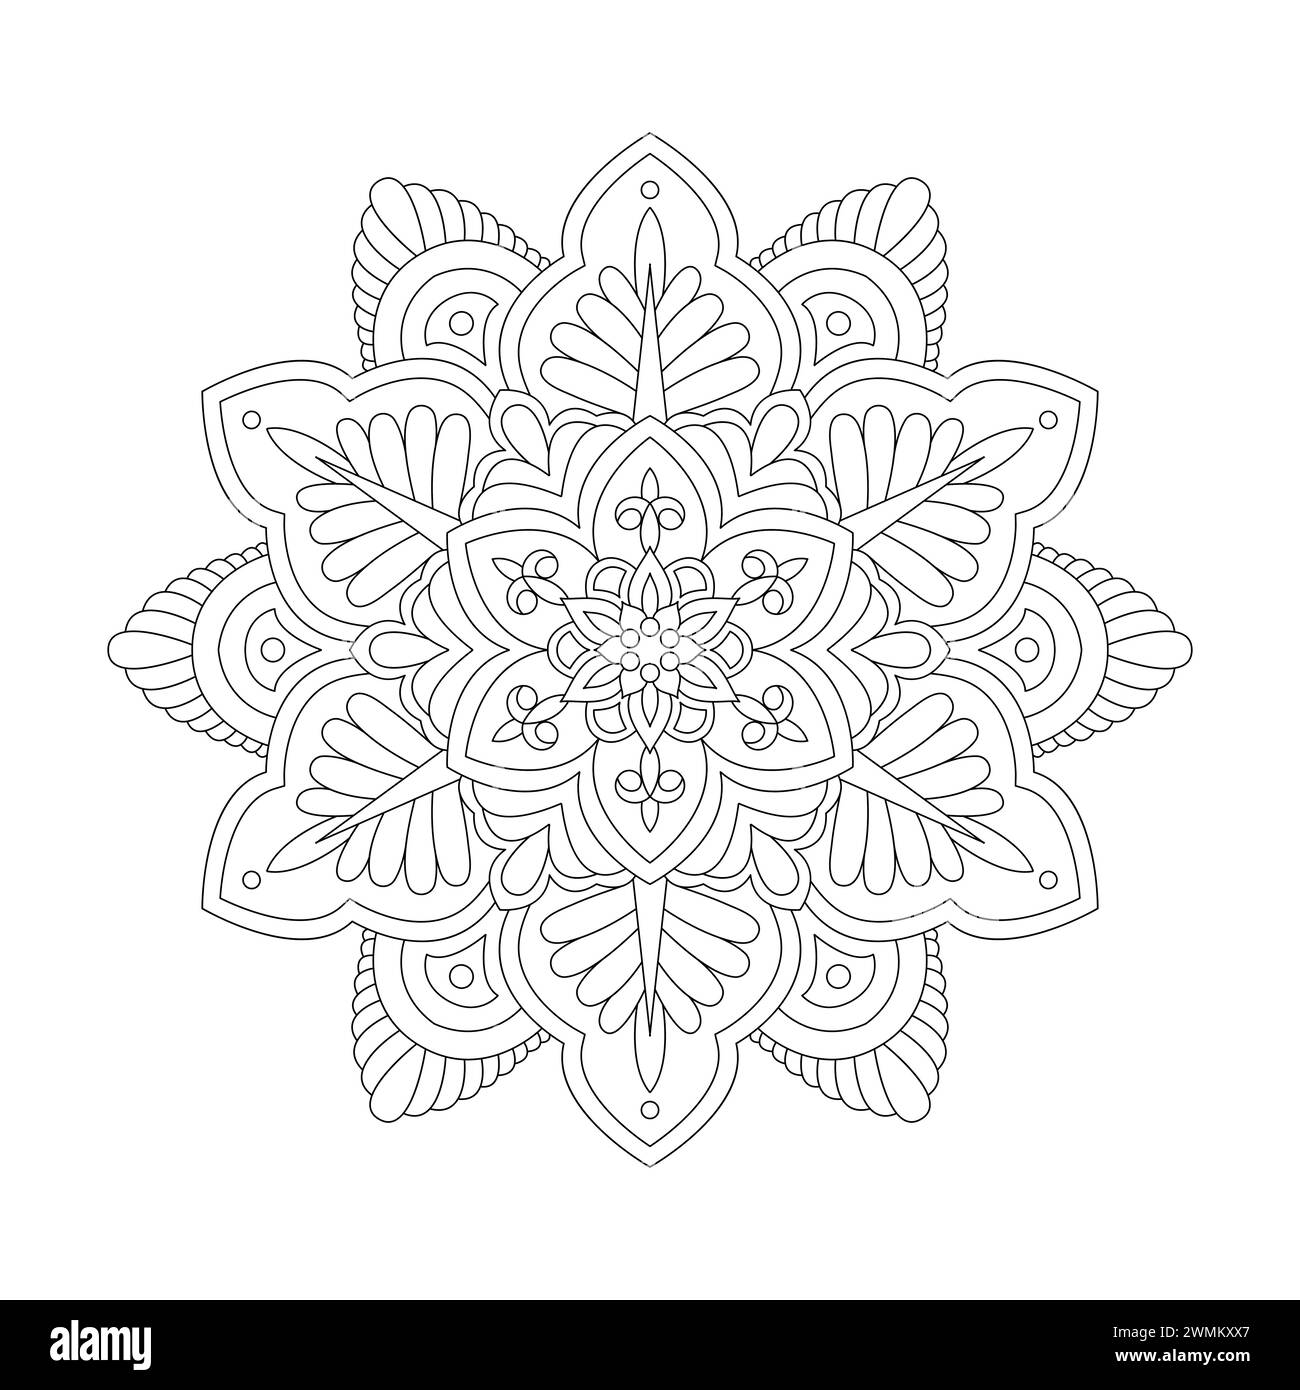 Luminous Mindfulness Mandala Coloring Book Page for kdp Book Interior. Peaceful Petals, Ability to Relax, Brain Experiences, Harmonious Haven, Peacefu Stock Vector